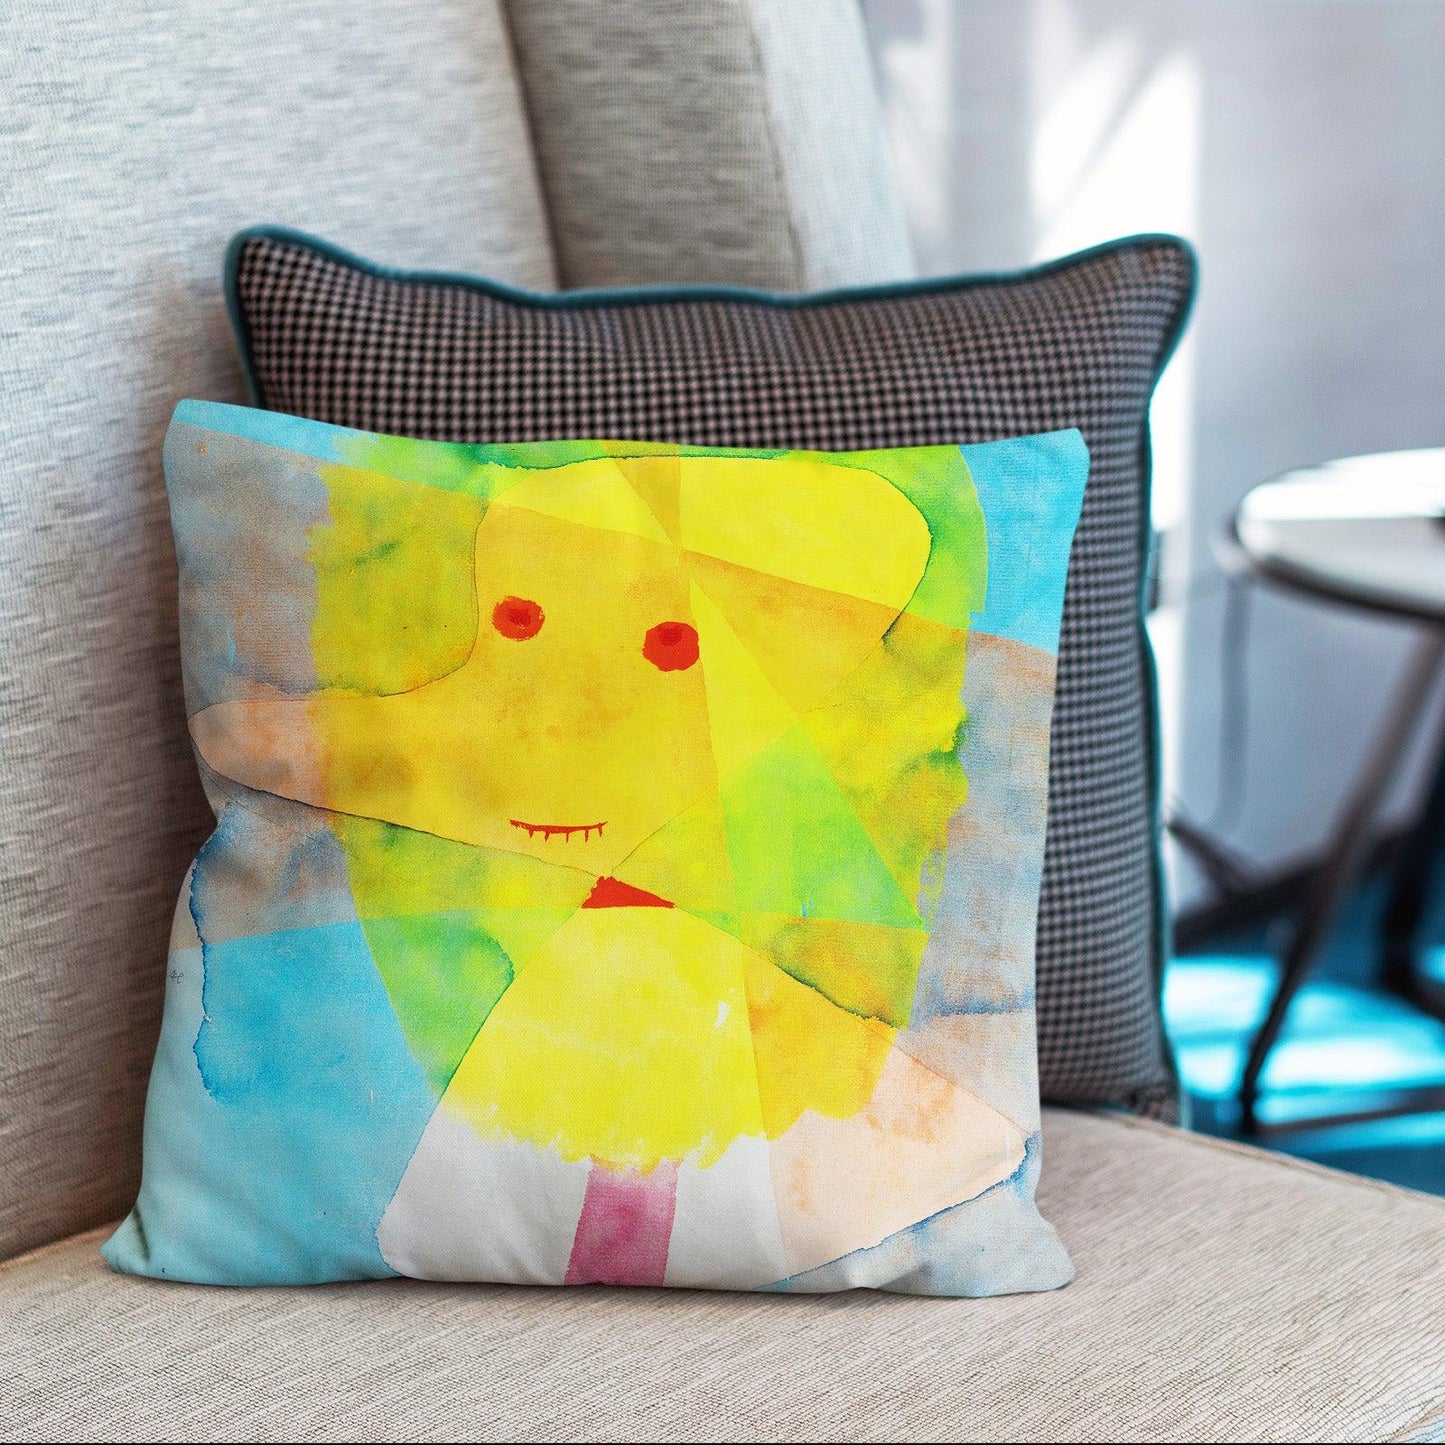 Art Abstract Throw Pillow Covers Pack of 2 18x18 Inch (Small Garden Ghost by Paul Klee) - Berkin Arts